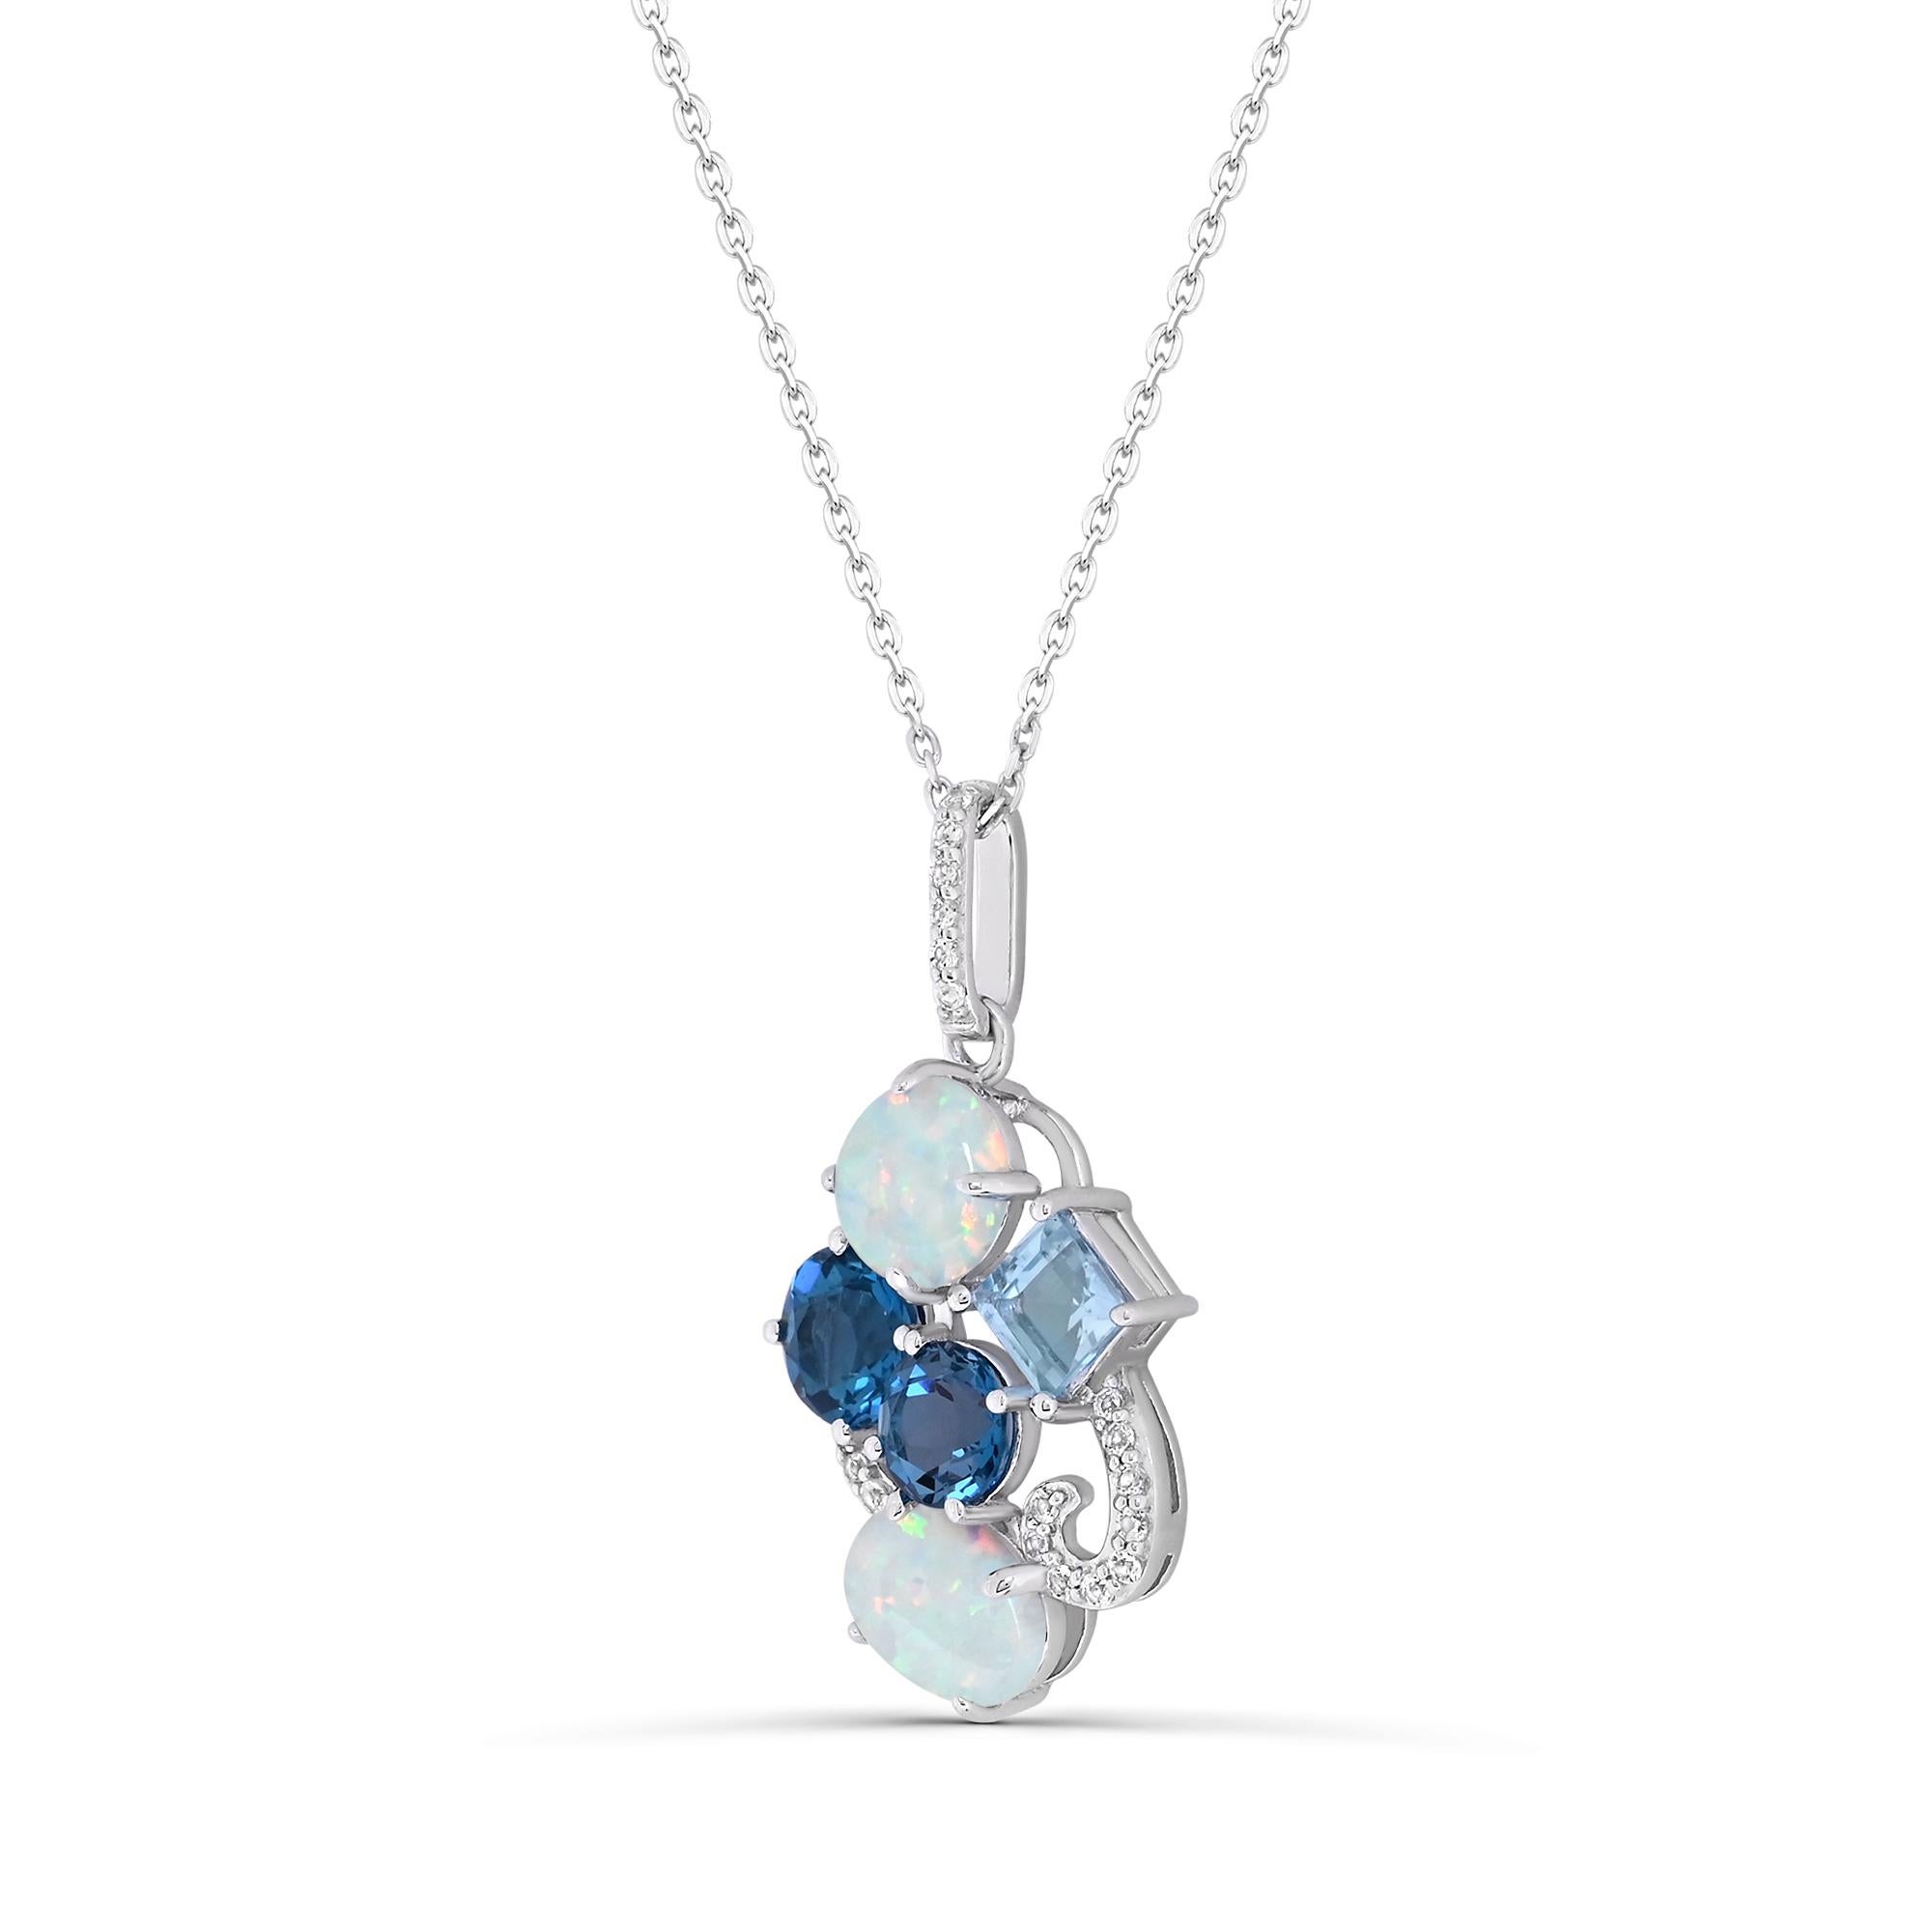 Indulge in the harmonious elegance of our Create Opal with White/London Blue/Sky Blue Topaz Pendant Necklace in Sterling Silver. This necklace boasts a stunning combination of opal, London blue and sky blue topazes accented by sparkling white topaz